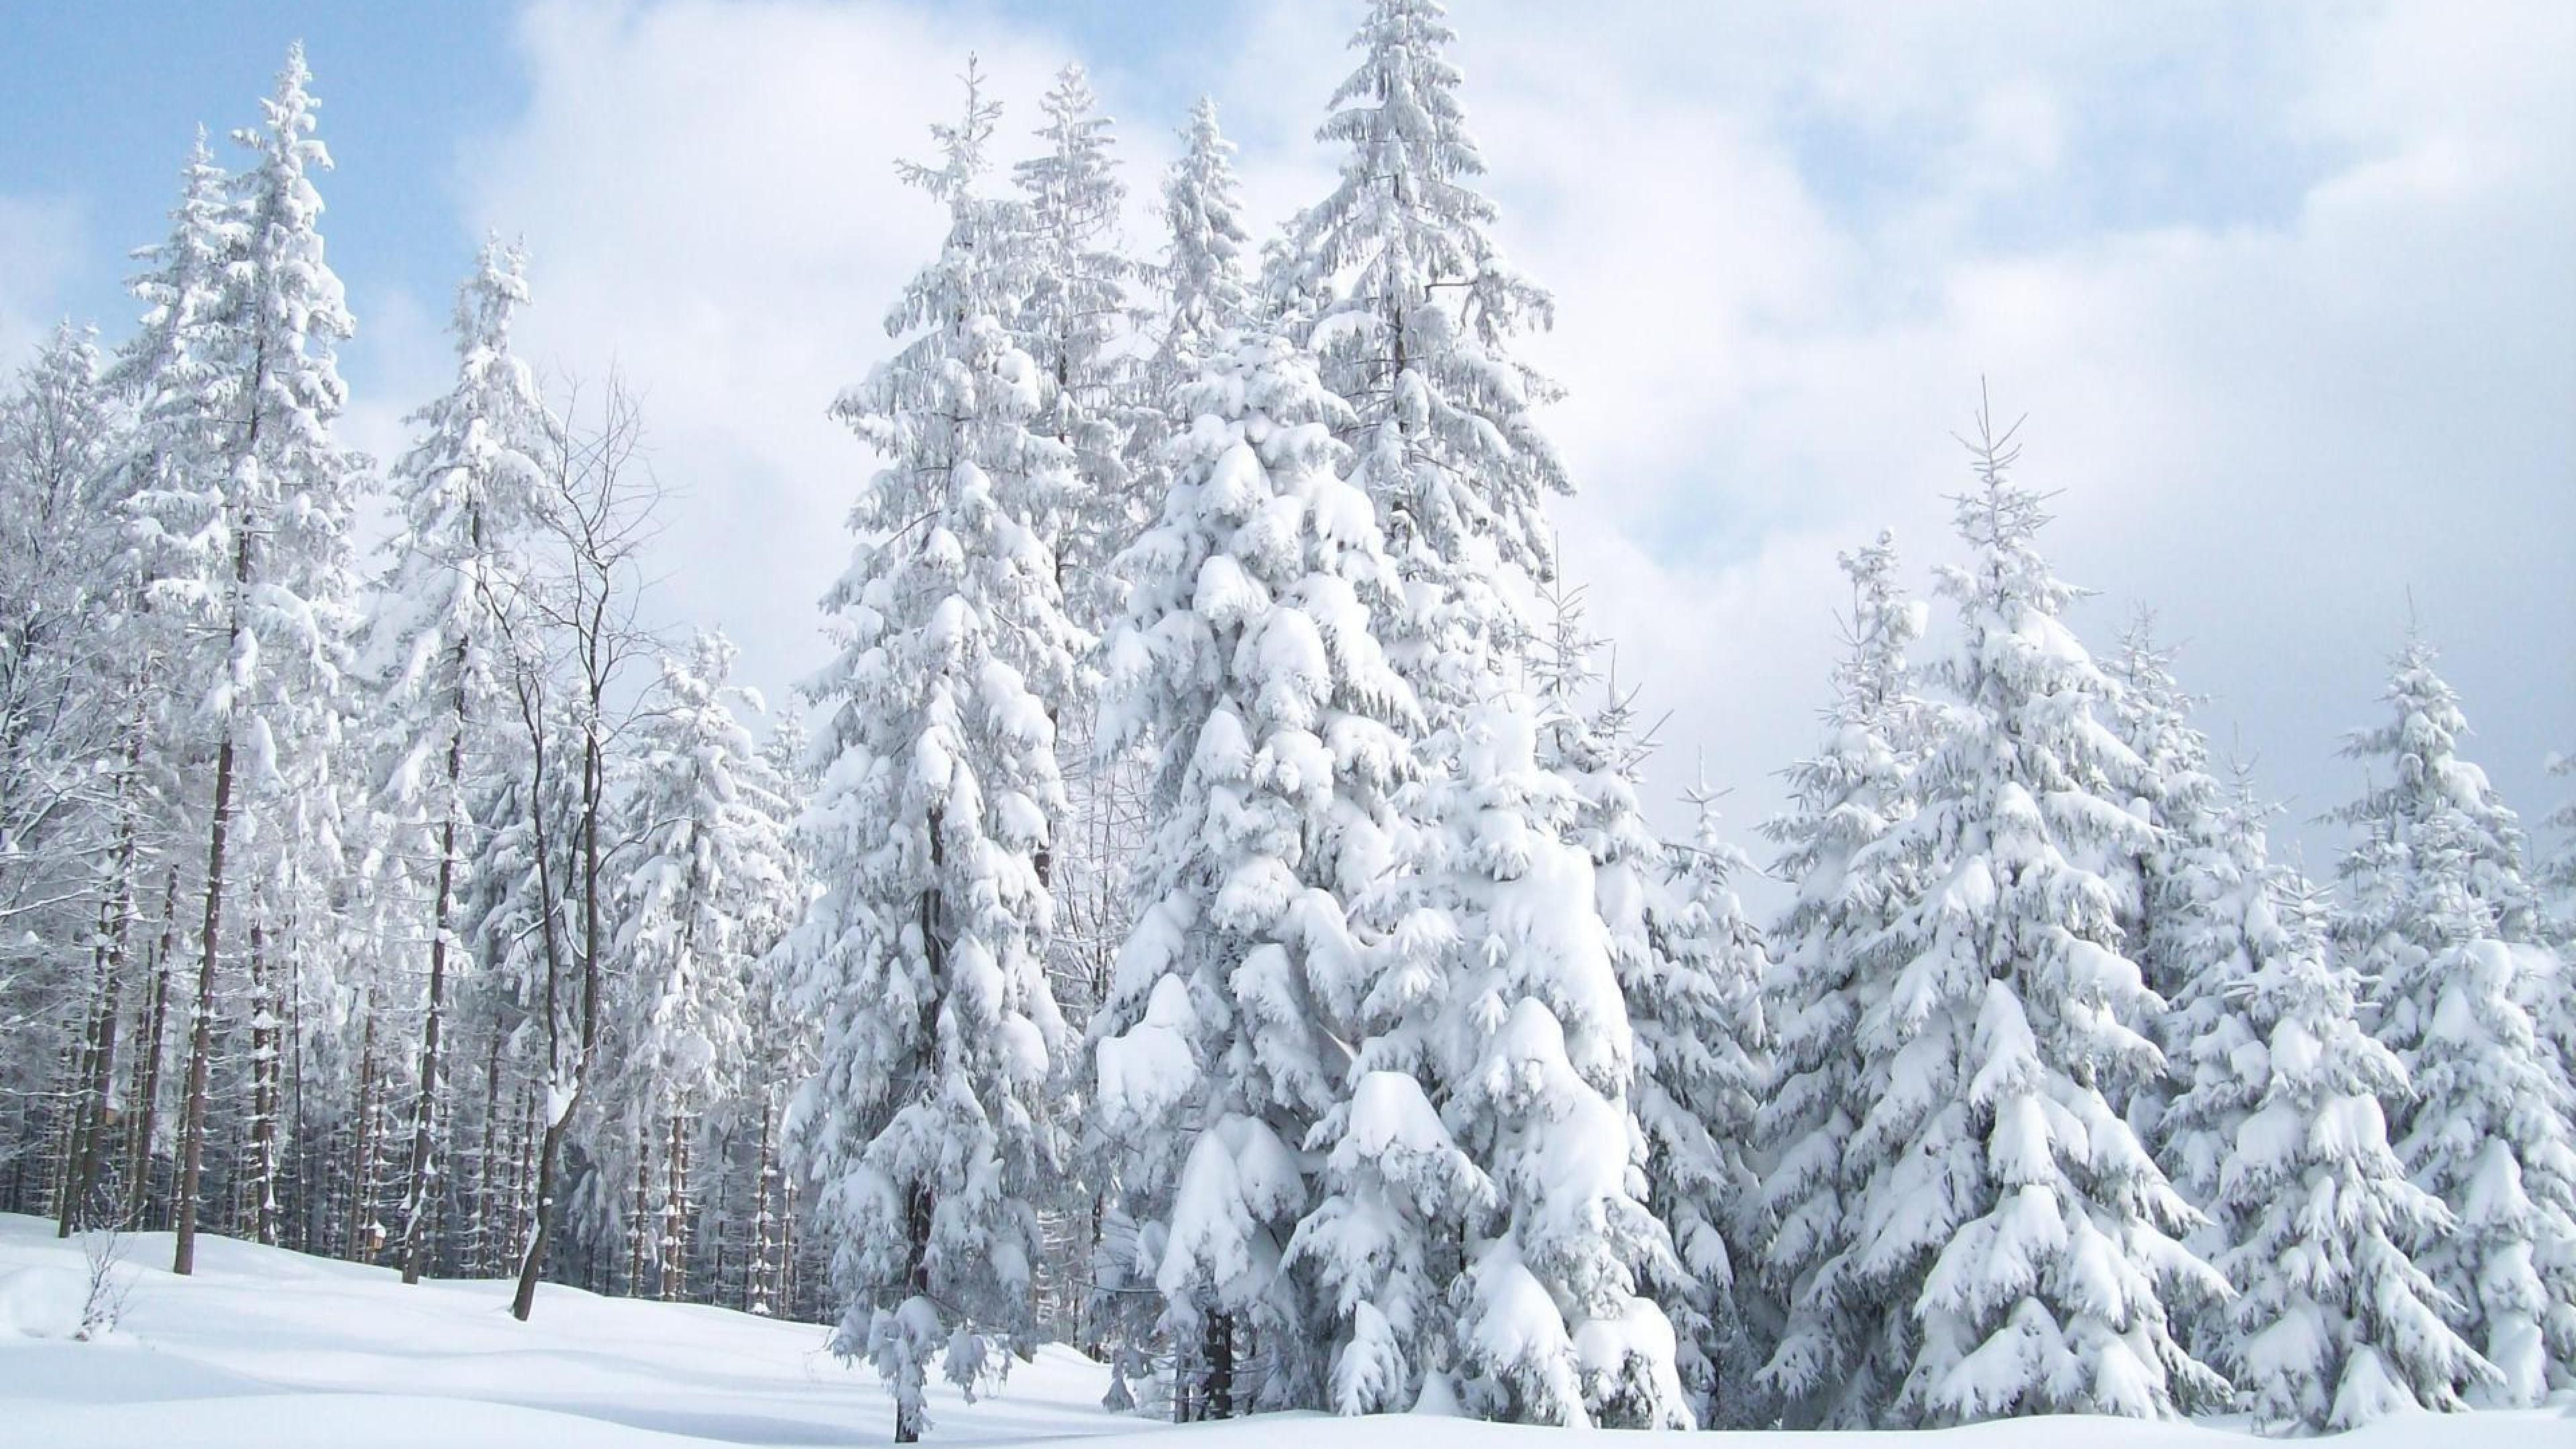 Snow On Fir Trees wallpaper. Winter landscape, Snow image, Winter picture